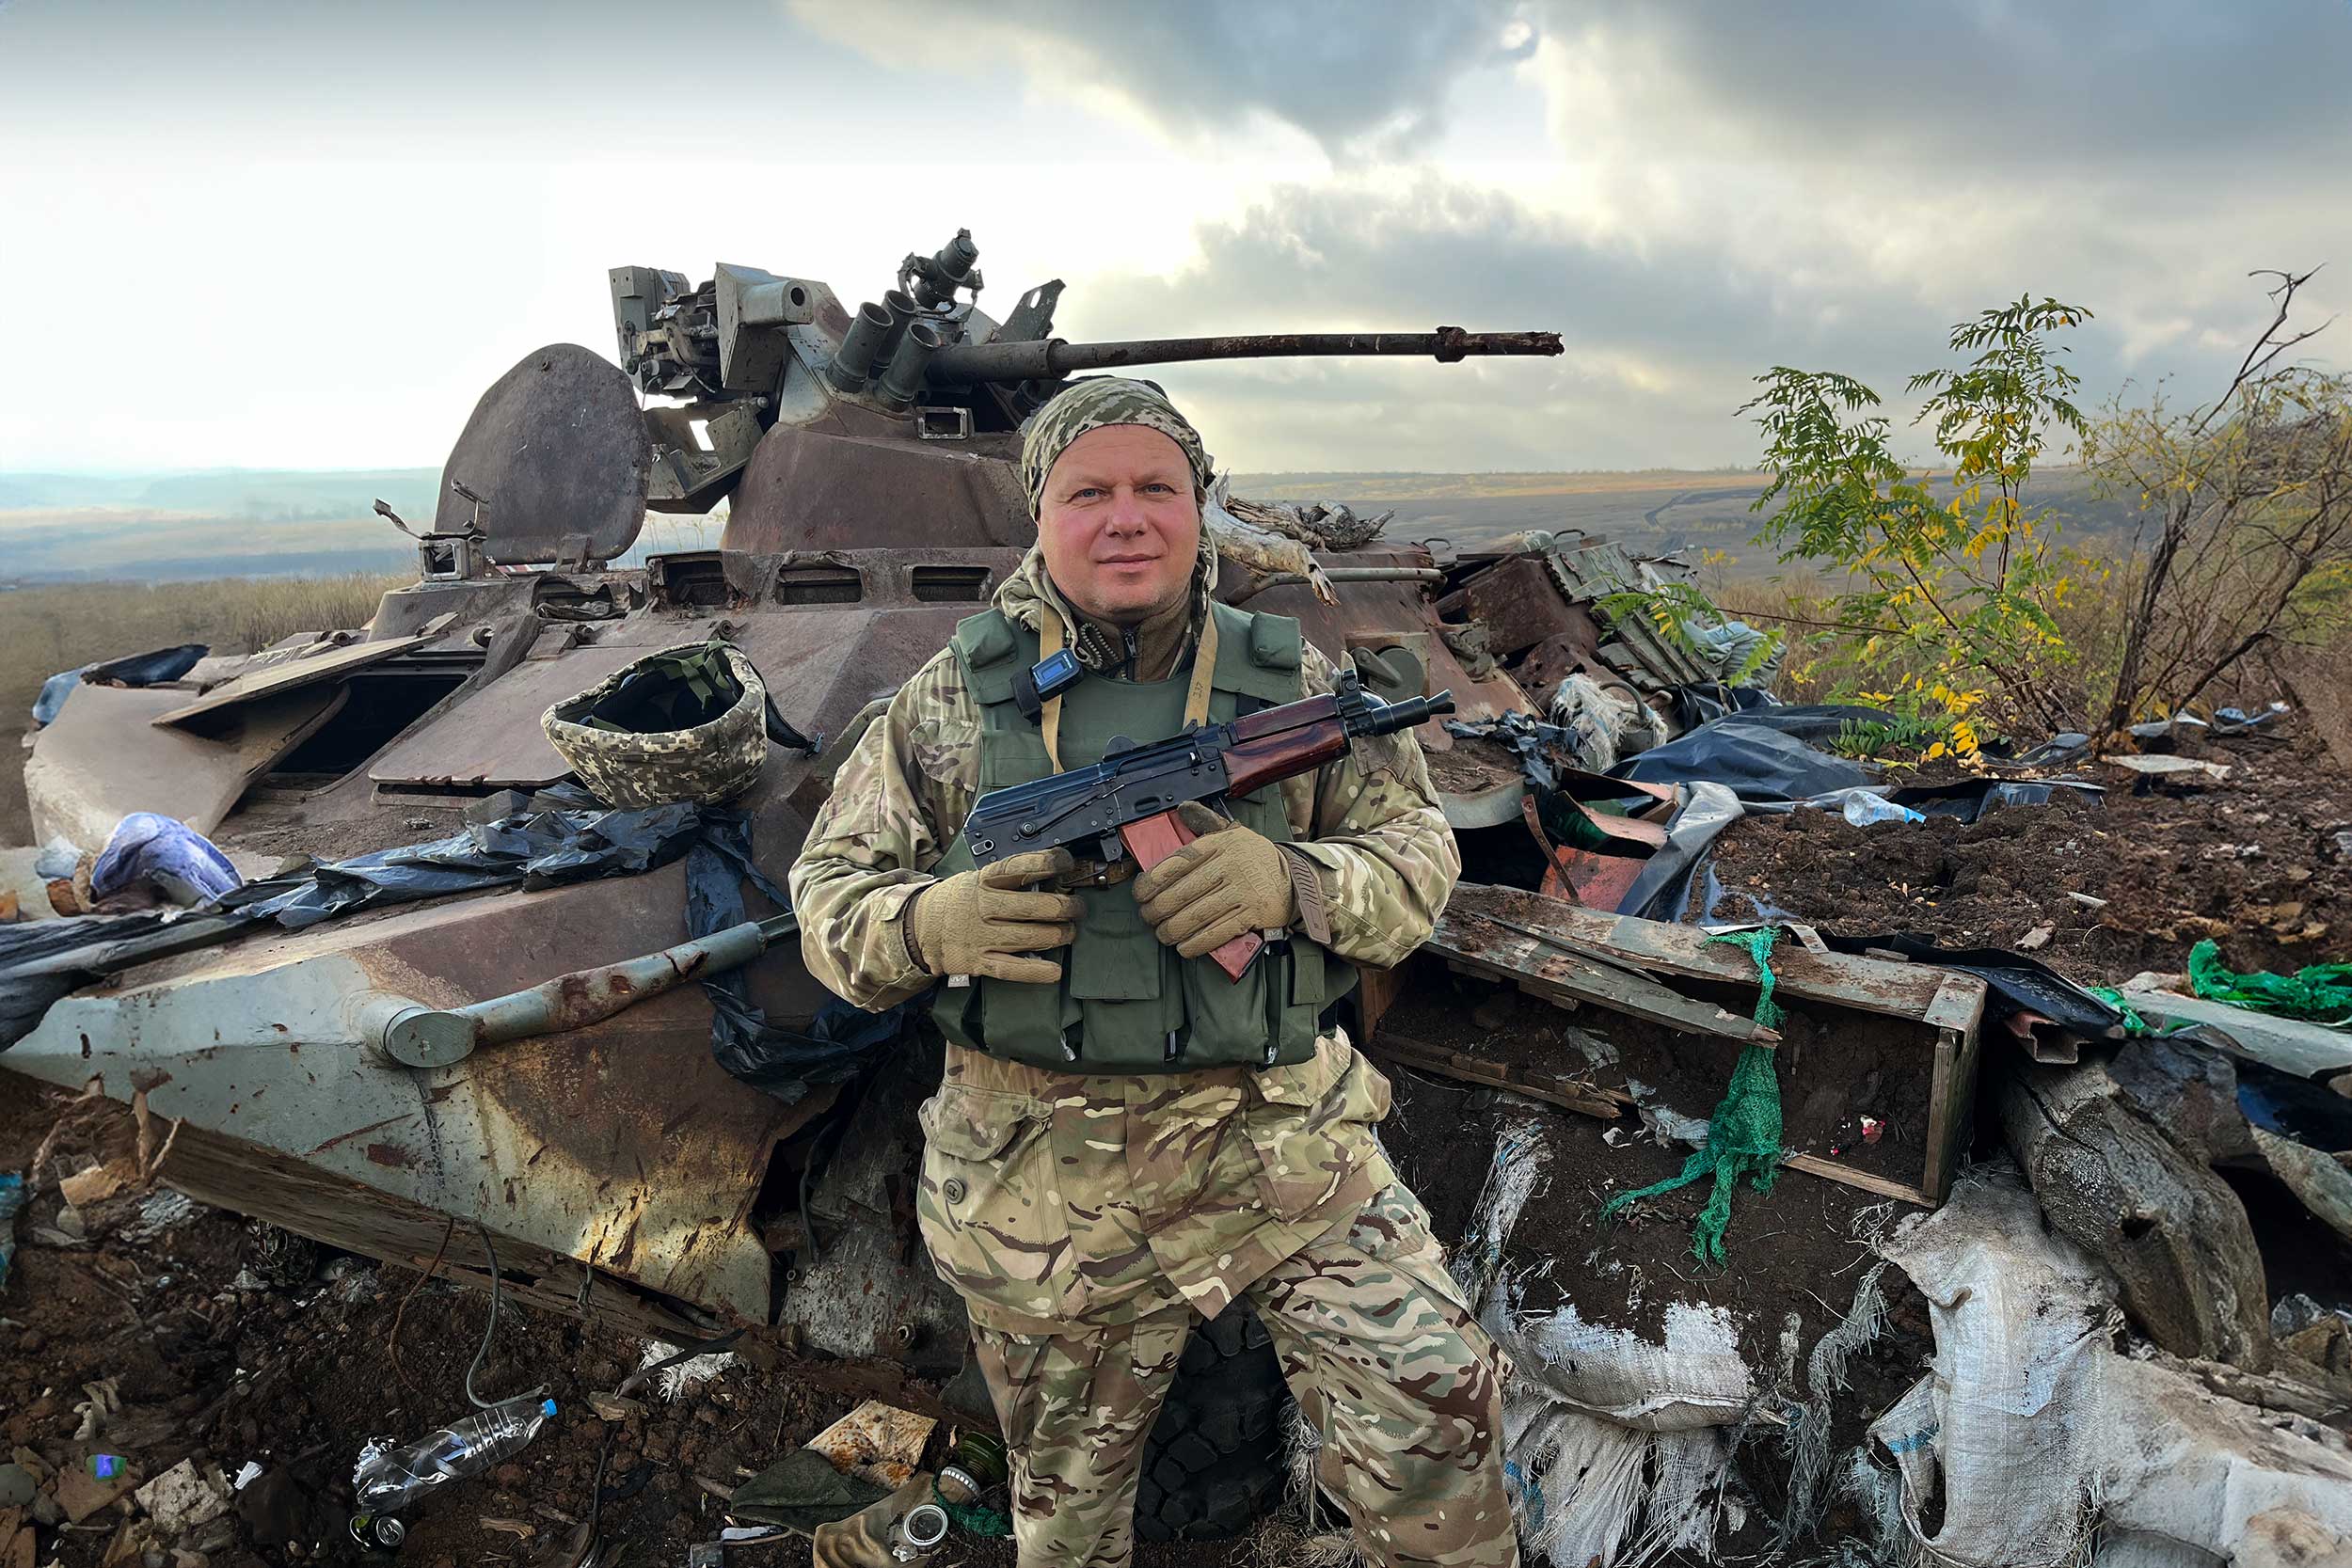 Sergii, an officer of the 65th Mechanised Brigade, in front of a destroyed Russian armoured personnel carrier (APC), on the hilltop Position X, in the Zaporizhzhia region. The APC served as a blindage, or protected dugout for Russian troops, and was the first location Ukraine troops seized in securing the trenches, which commanded the road below, running south. © IWPR